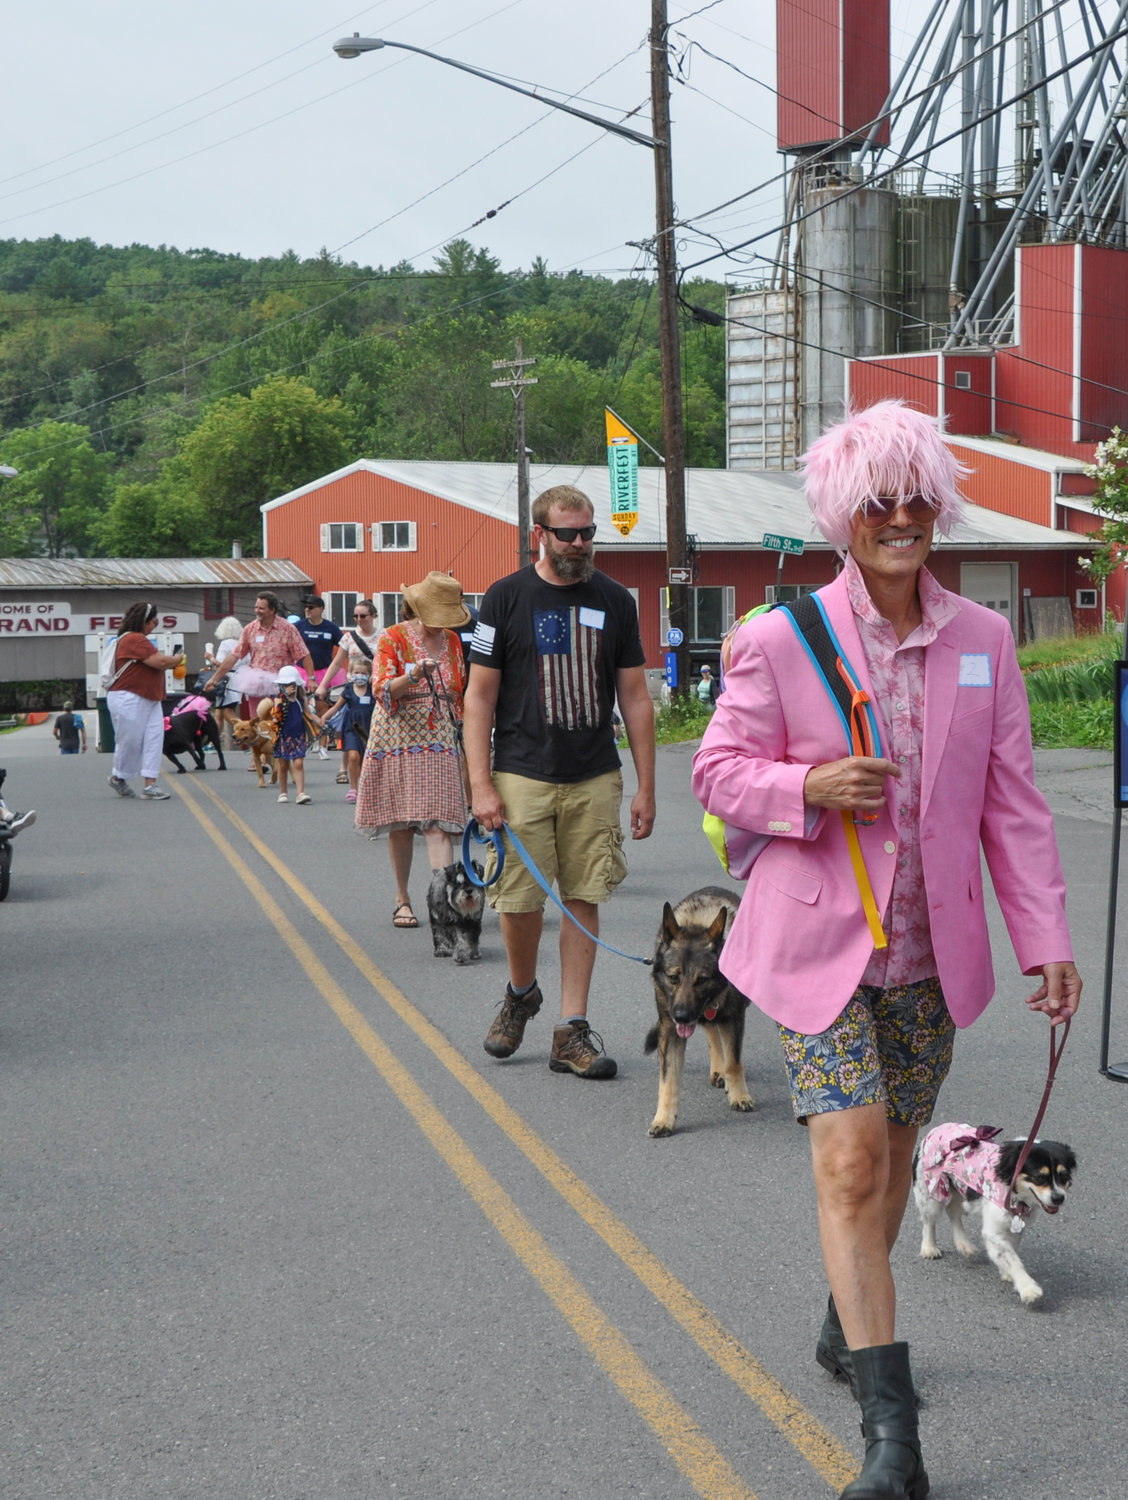 While there were no drag queens at Narrowsburg’s Riverfest last Sunday, the animals weren’t the only ones festively attired for the annual River Dogs parade.